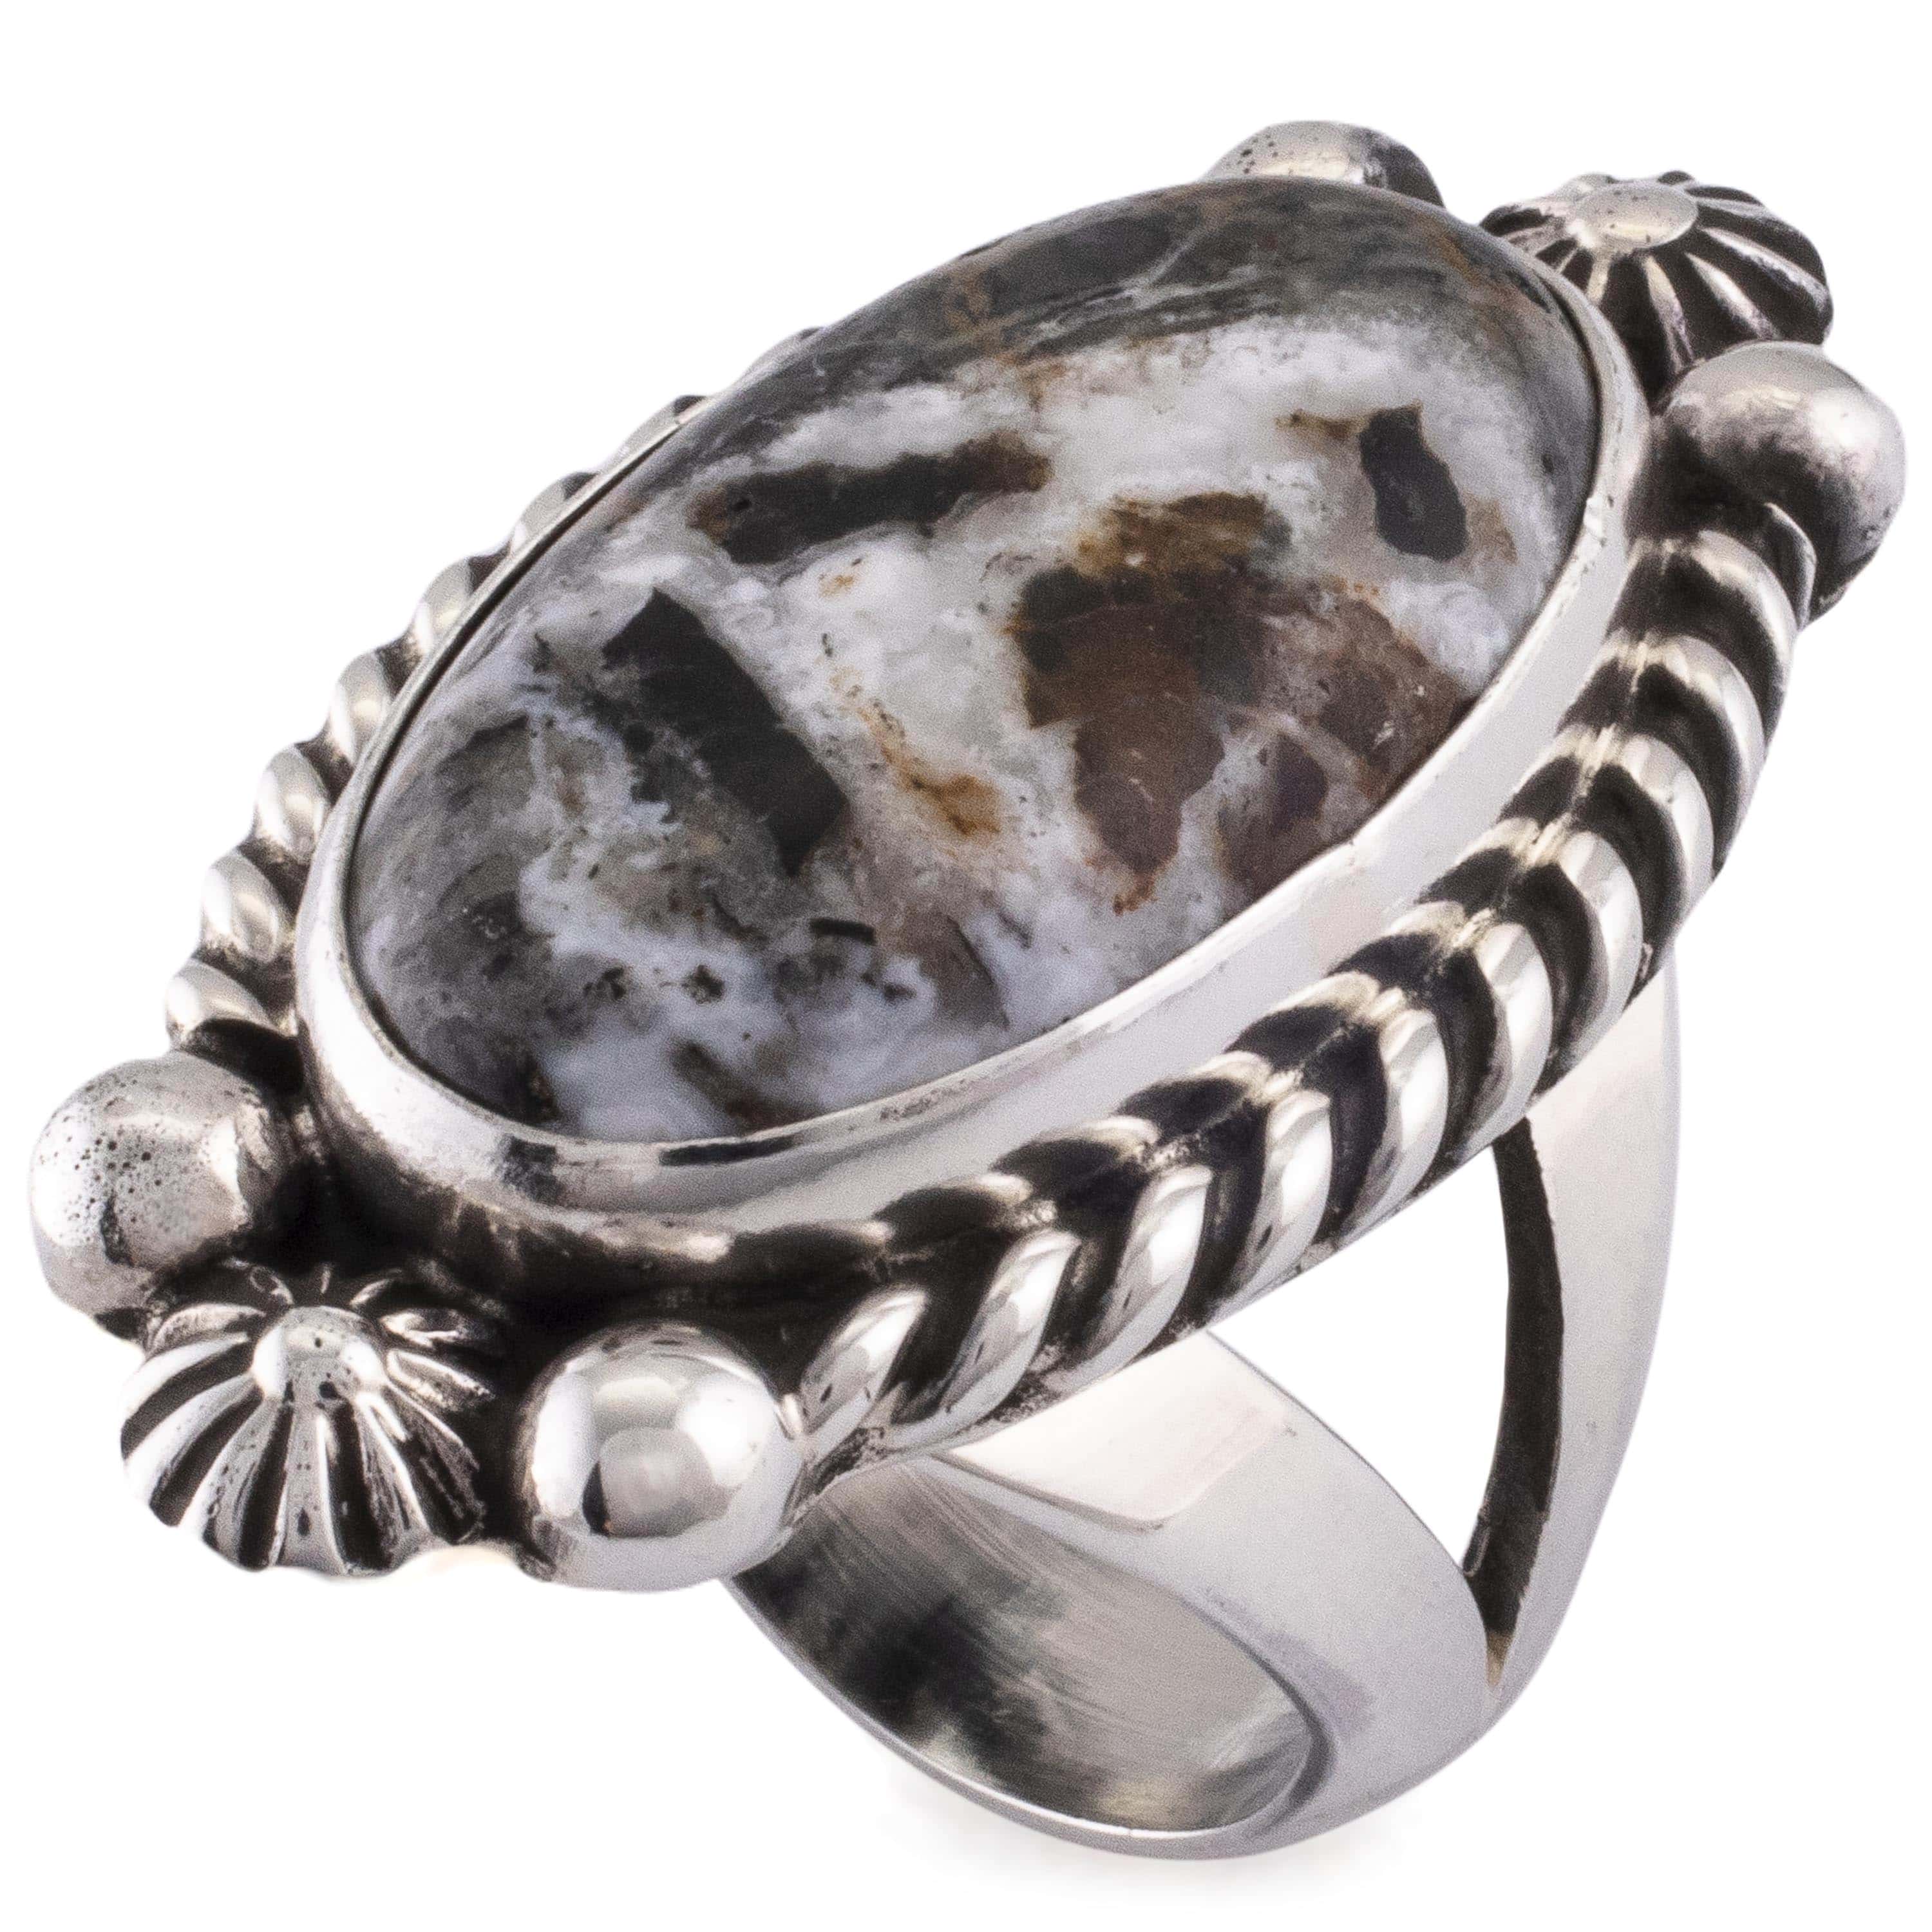 Kalifano Native American Jewelry 7 Eddie Secatero Navajo White Buffalo Turquoise USA Native American Made 925 Sterling Silver Ring NAR800.033.7